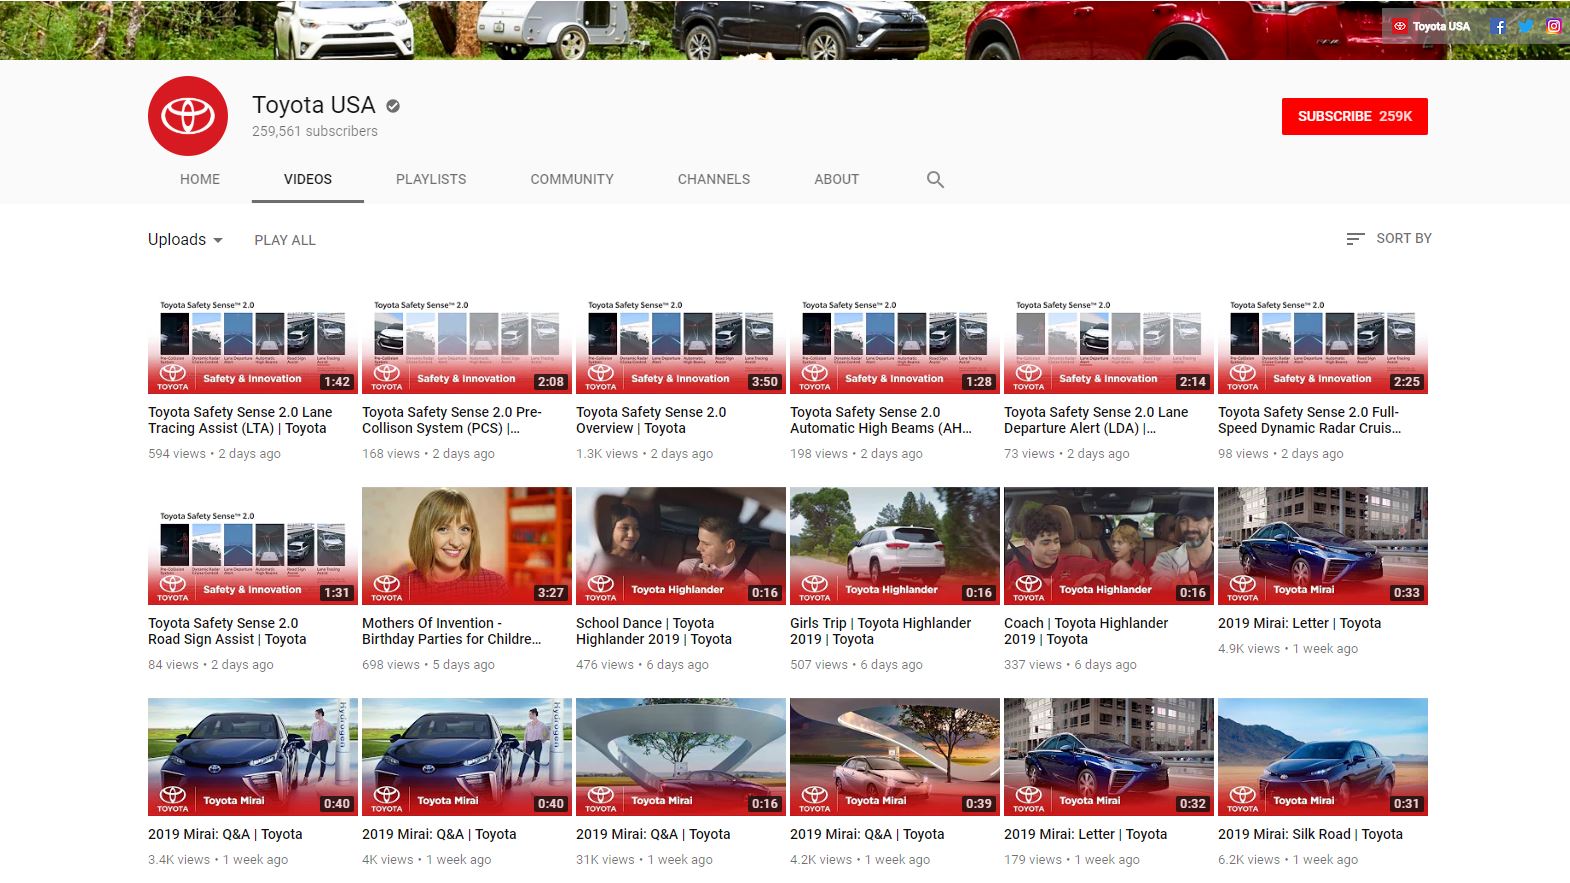 YouTube SEO Video Content Strategy - Toyota - Chainlink Relationship Marketing